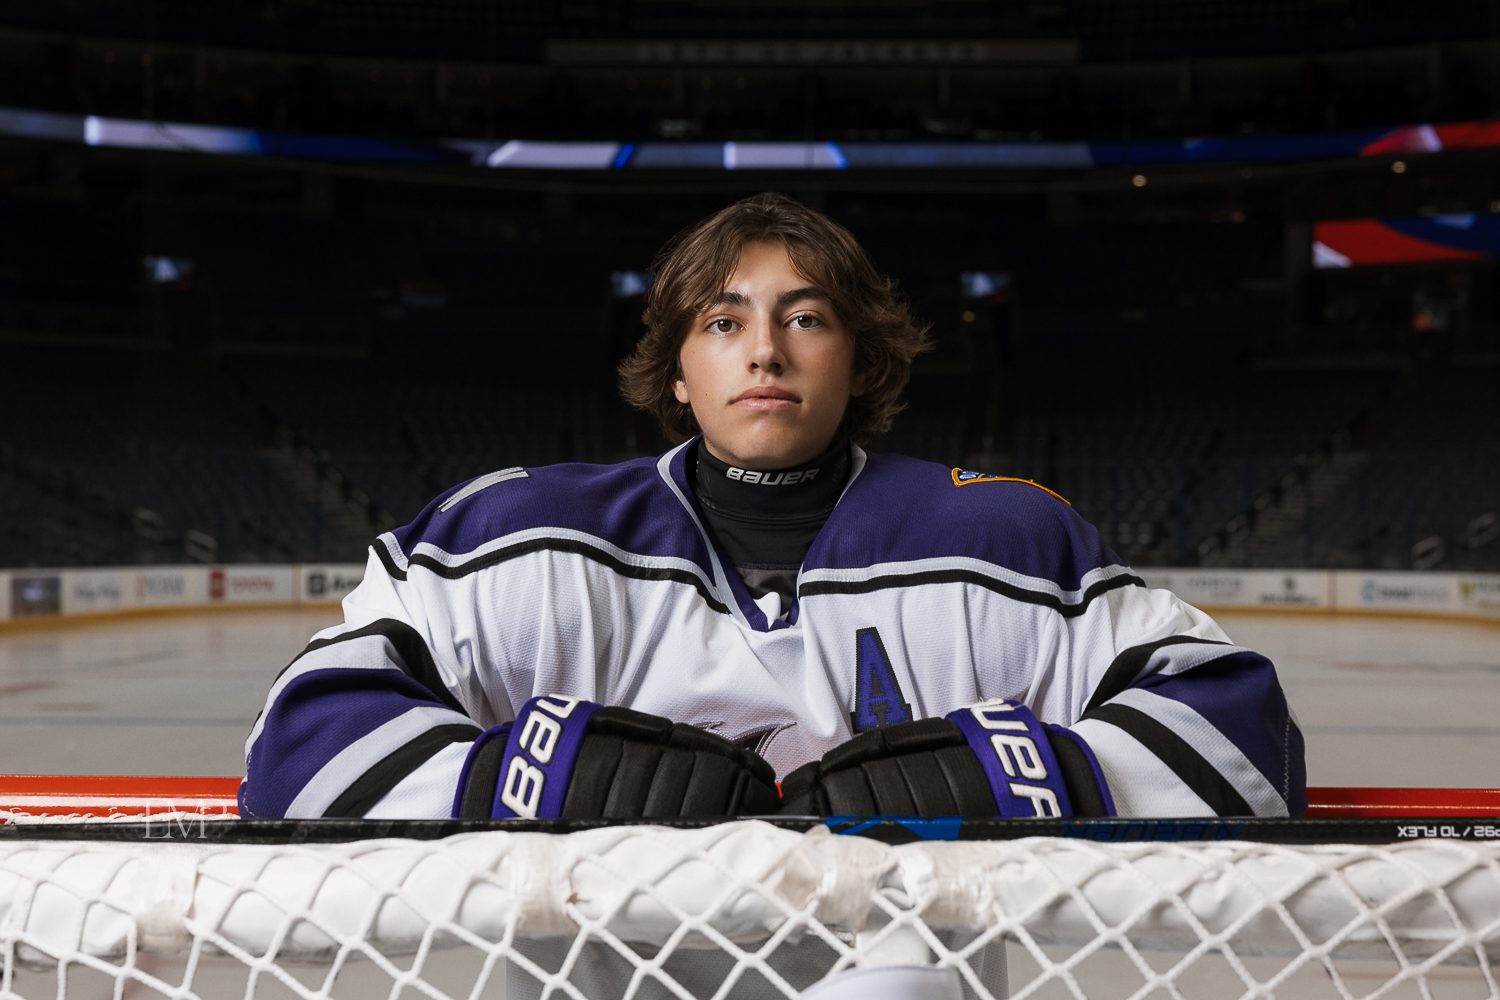 High school senior hockey player on ice at Nationwide Arena